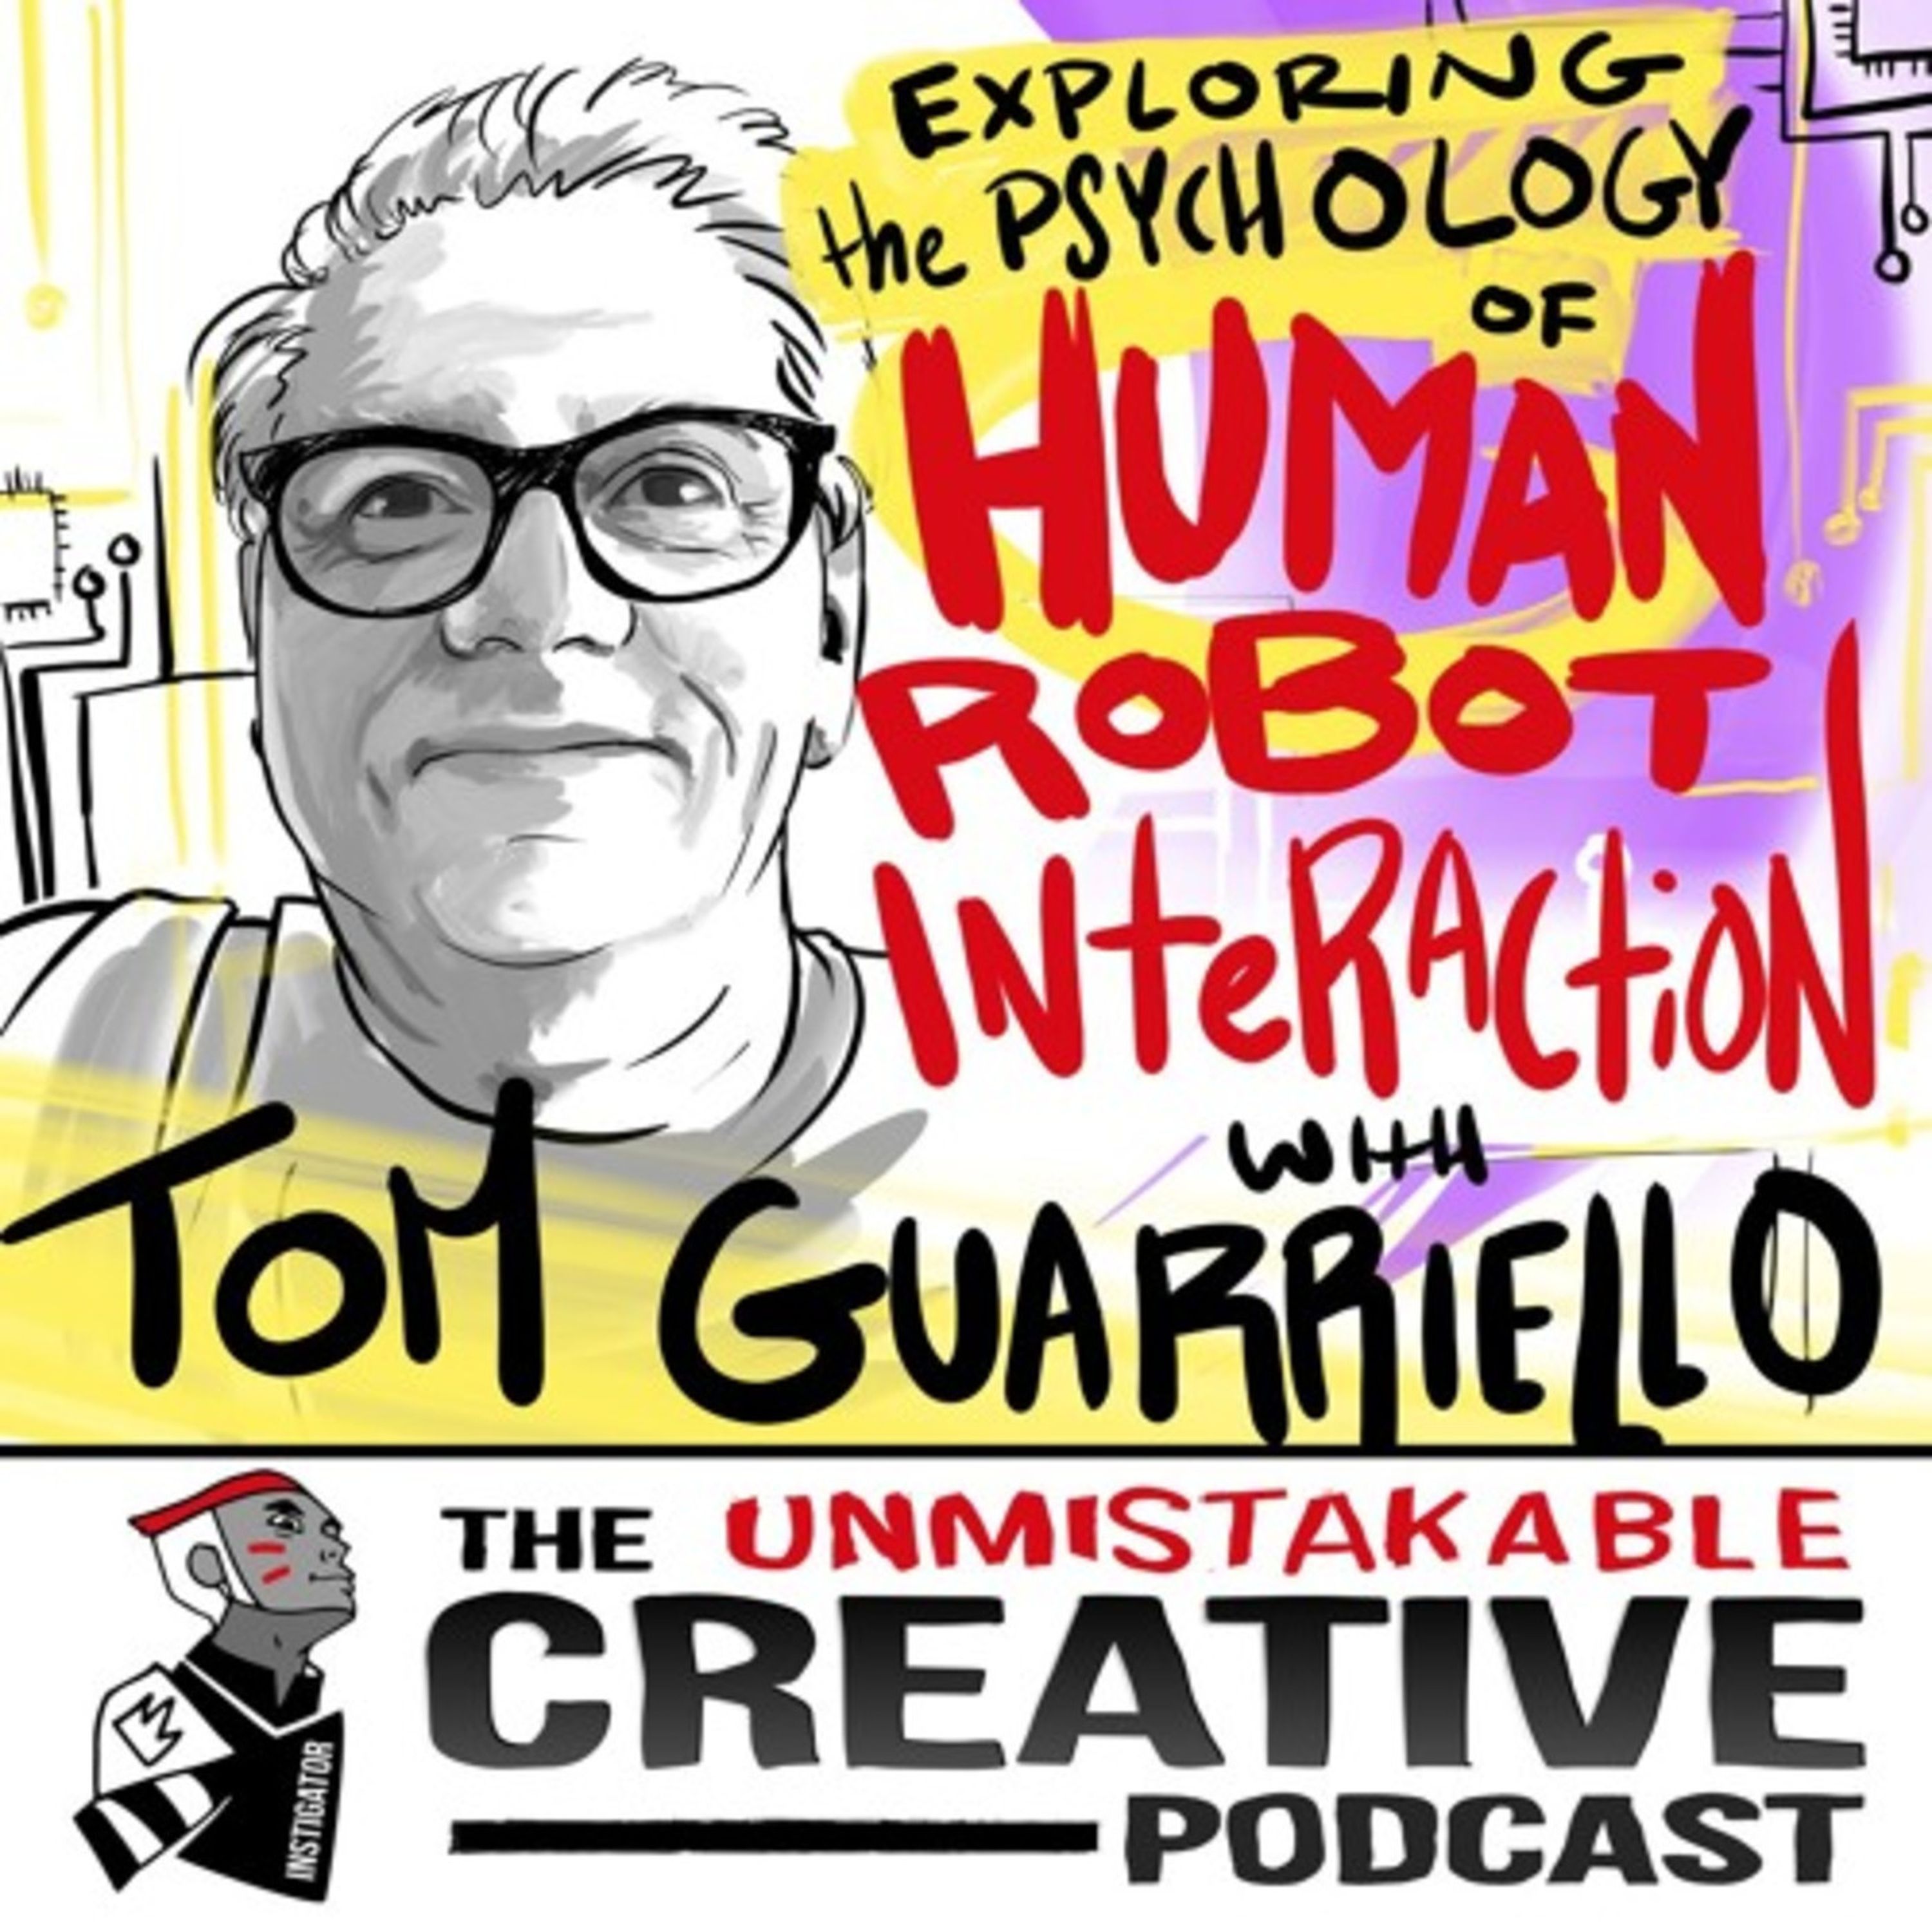 Exploring the Psychology of Human Robot Interaction with Tom Guarriello